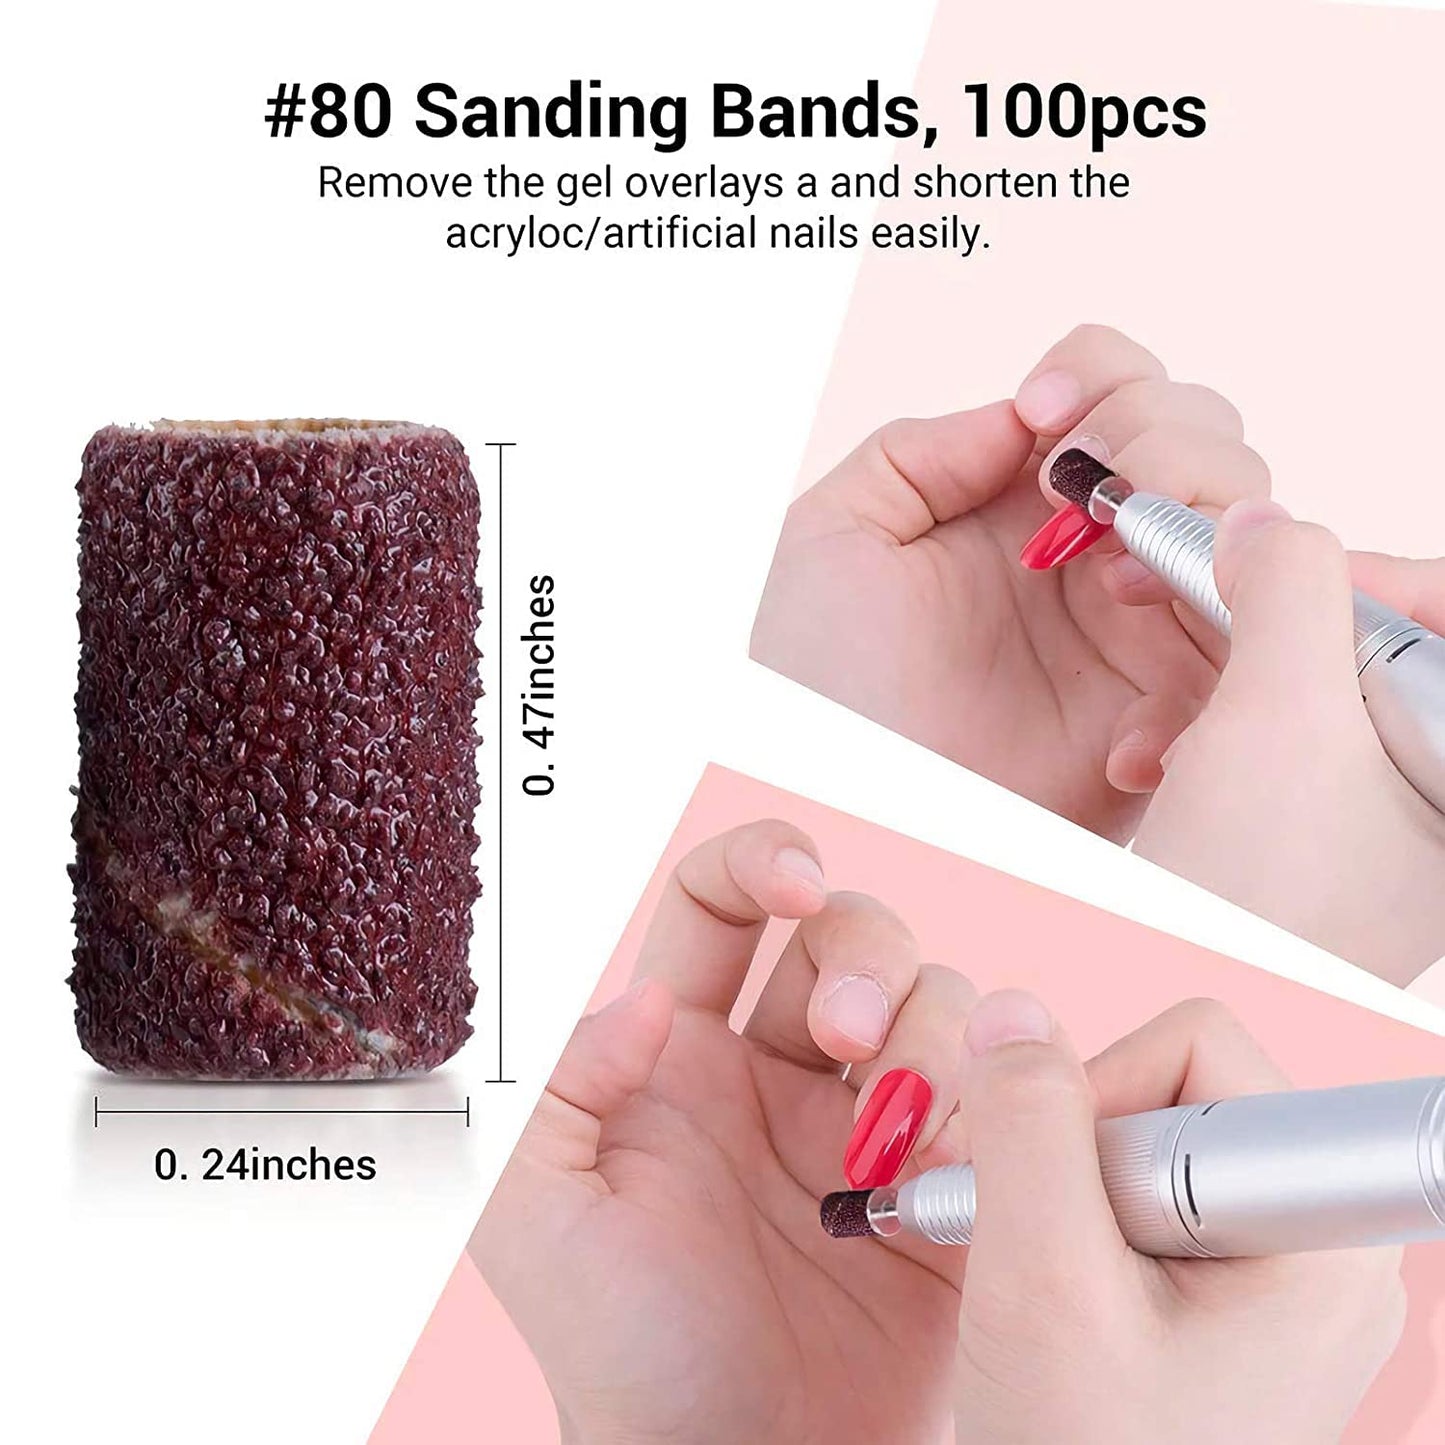 MelodySusie 300 Pcs Professional Sanding Bands with Mandrel for Nail Drill, 80 Coarse, 120 Medium, 180 Fine Grit EFile Sand Piece Nail Drill Bits Set for Acrylic Nails Manicures and Pedicures